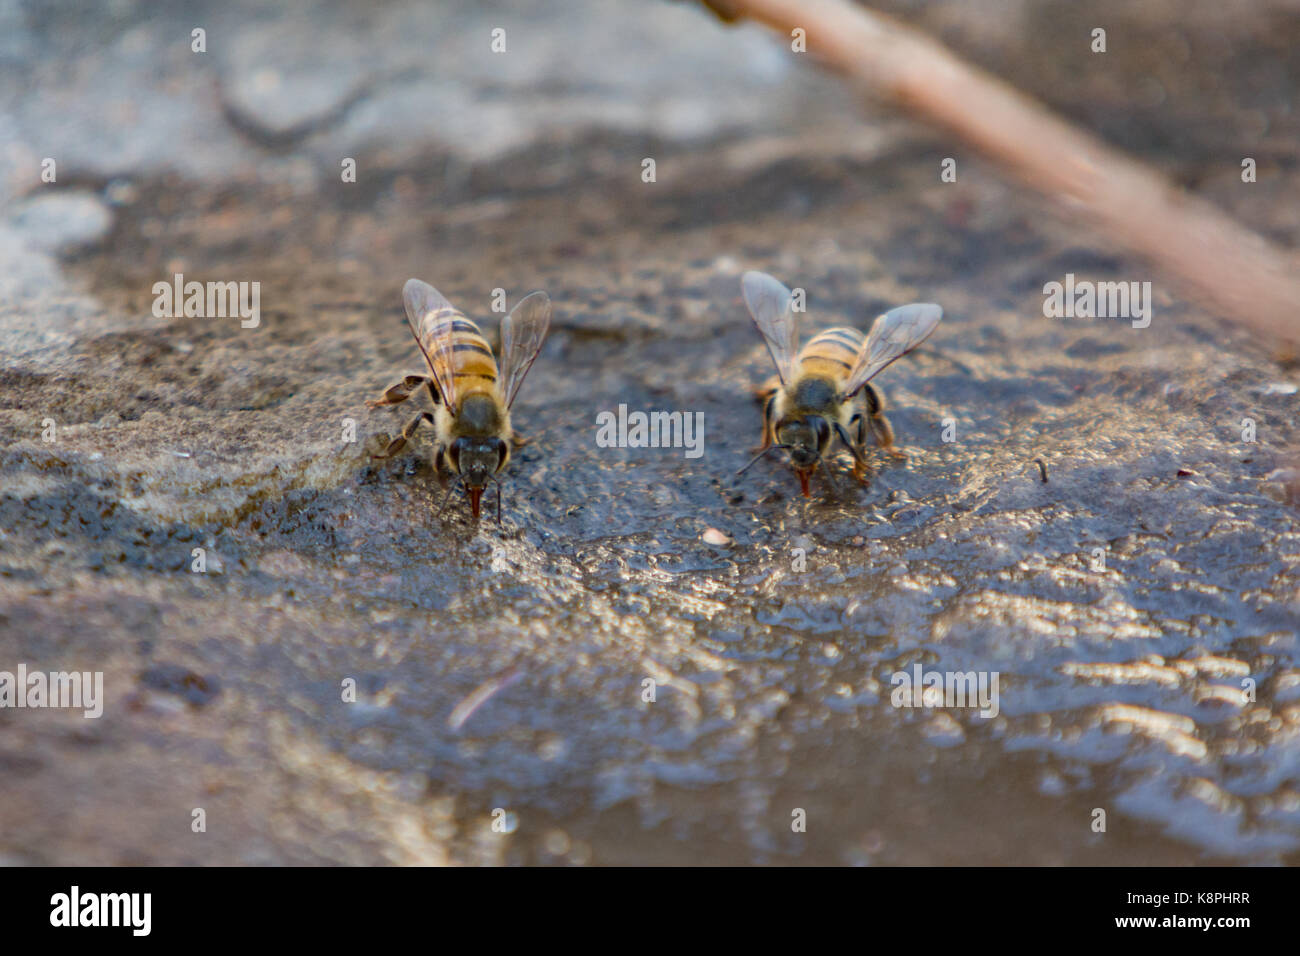 Asuncion, Paraguay. 20th Sep, 2017. A hot sunny day in Asuncion with temperatures high around 37°C as honey bees seek out shallow water sources to stay hydrated near a puddle. Credit: Andre M. Chang/ARDUOPRESS/Alamy Live News Stock Photo